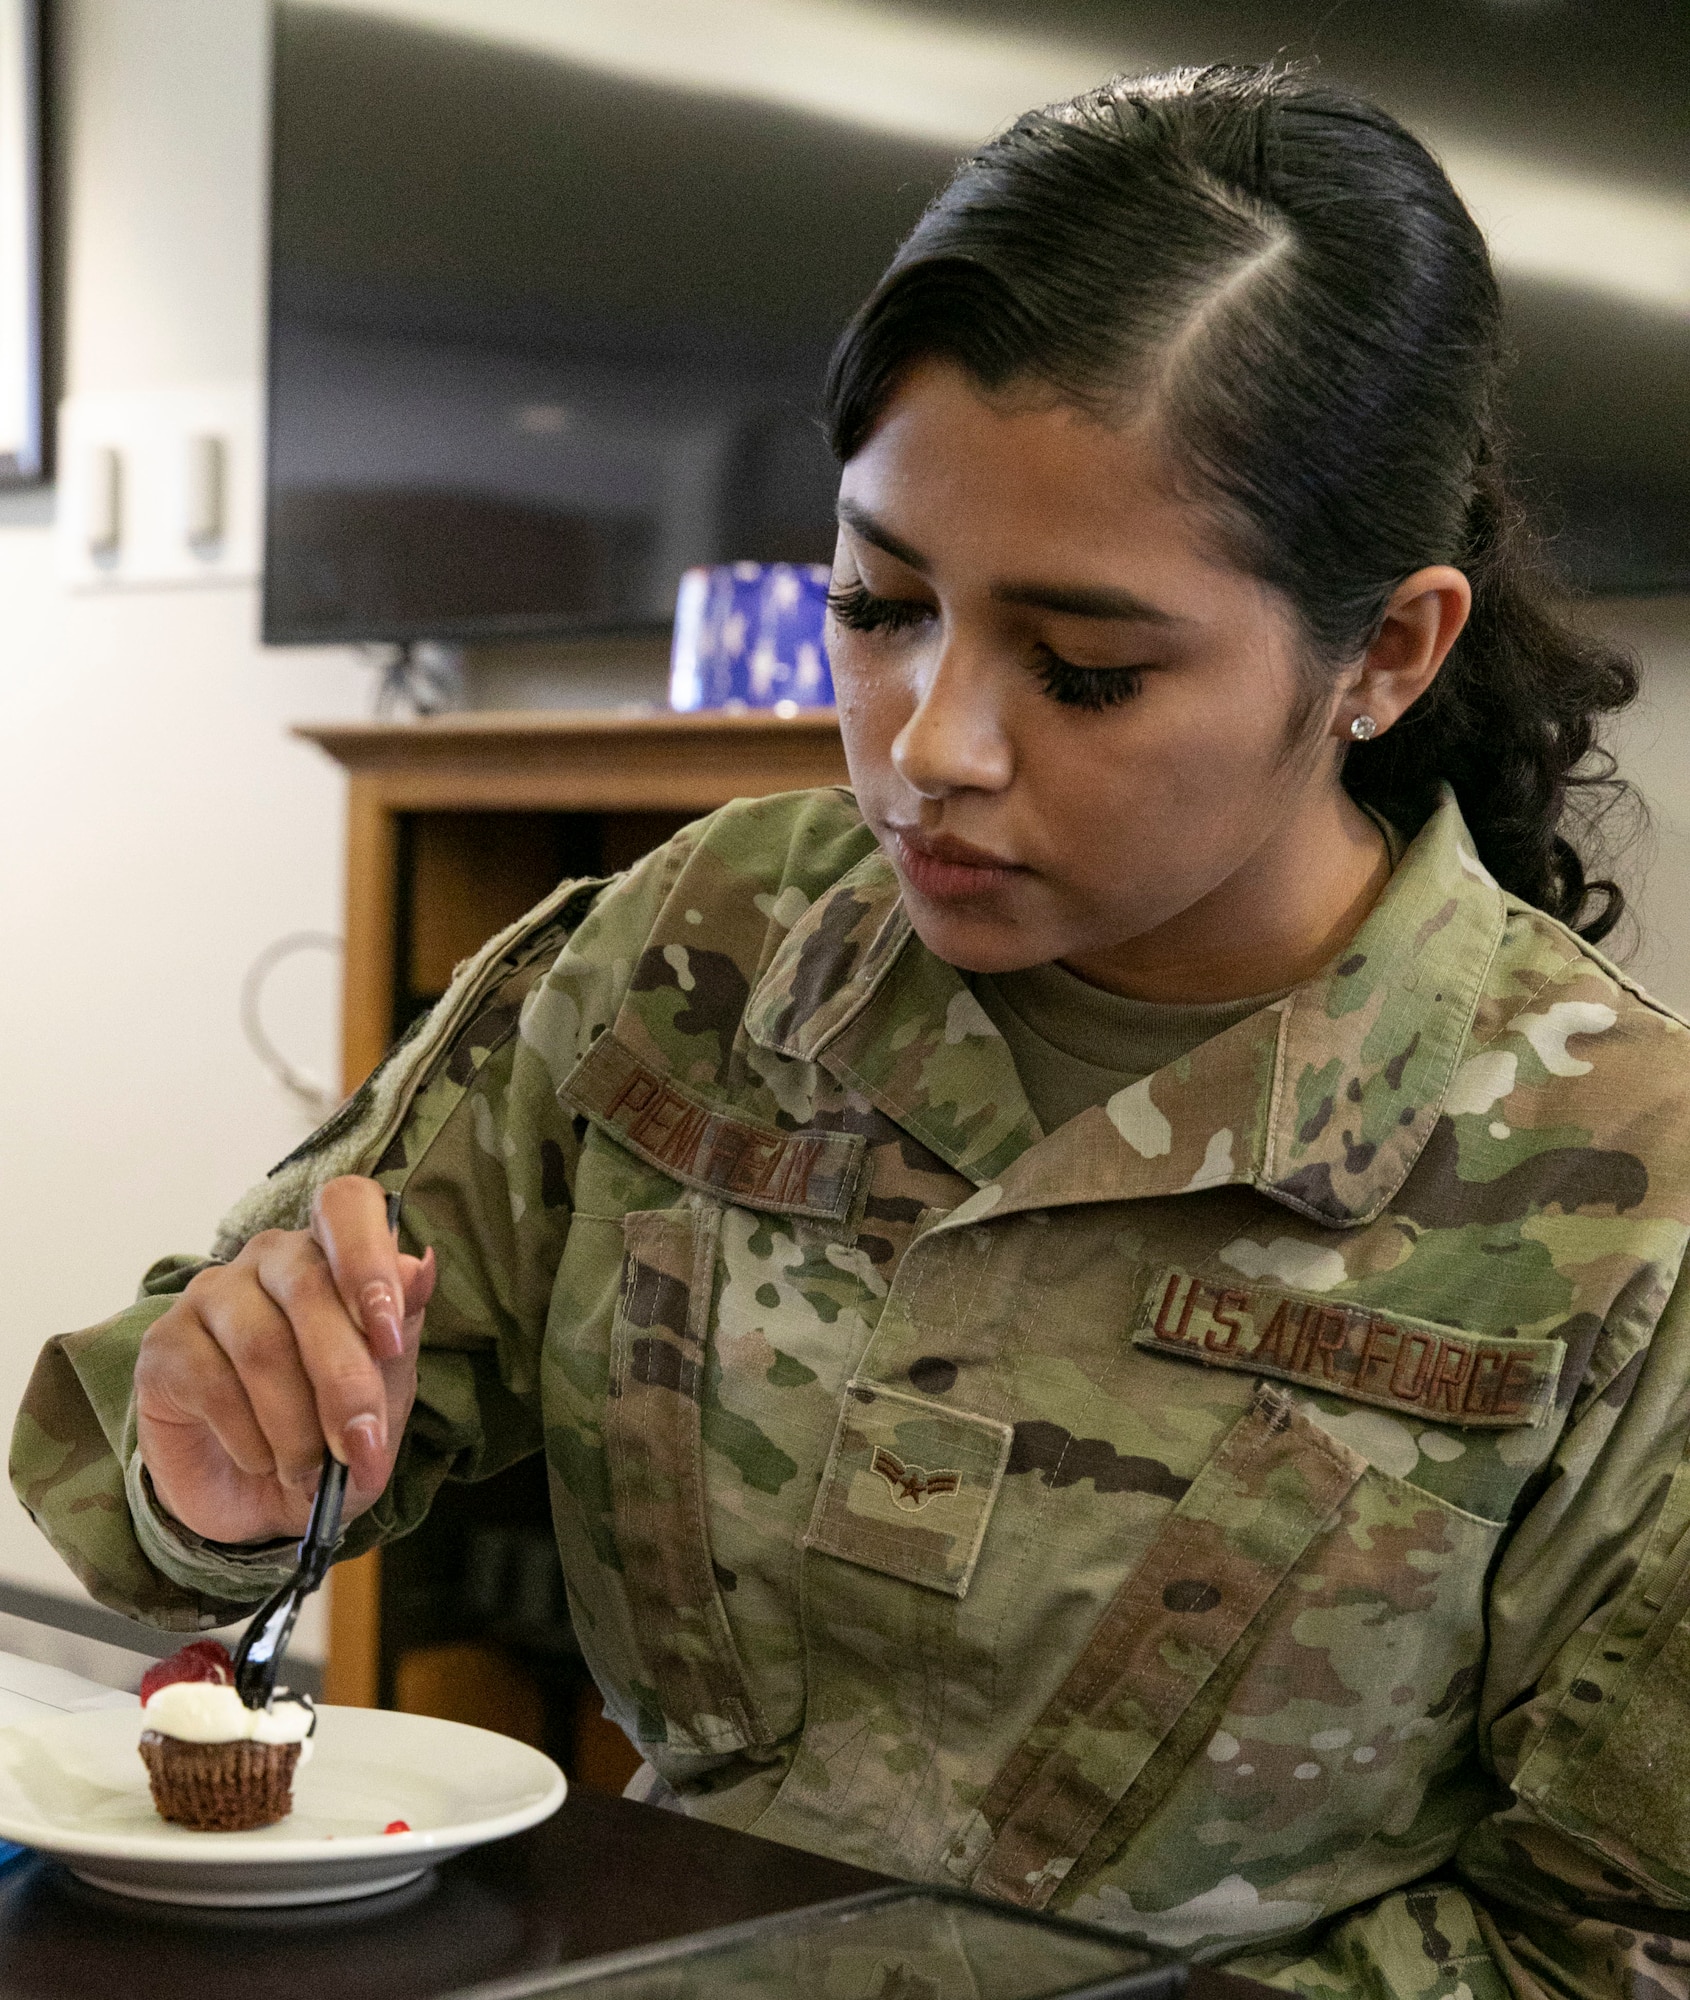 Airman 1st Class Angie Pena-Felix, Air Force Mortuary Affairs Operations Fisher House manager, samples one of the desserts entered in The Great Diversity Dessert Bake-Off Challenge held at the Patterson Dining Facility on Dover Air Force Base, Delaware, Aug. 24, 2022. Pena-Felix was one of four judges for the challenge, which was part of the 436th Force Support Squadron’s National Foreign Language Observation week. (U.S. Air Force photo by Roland Balik)